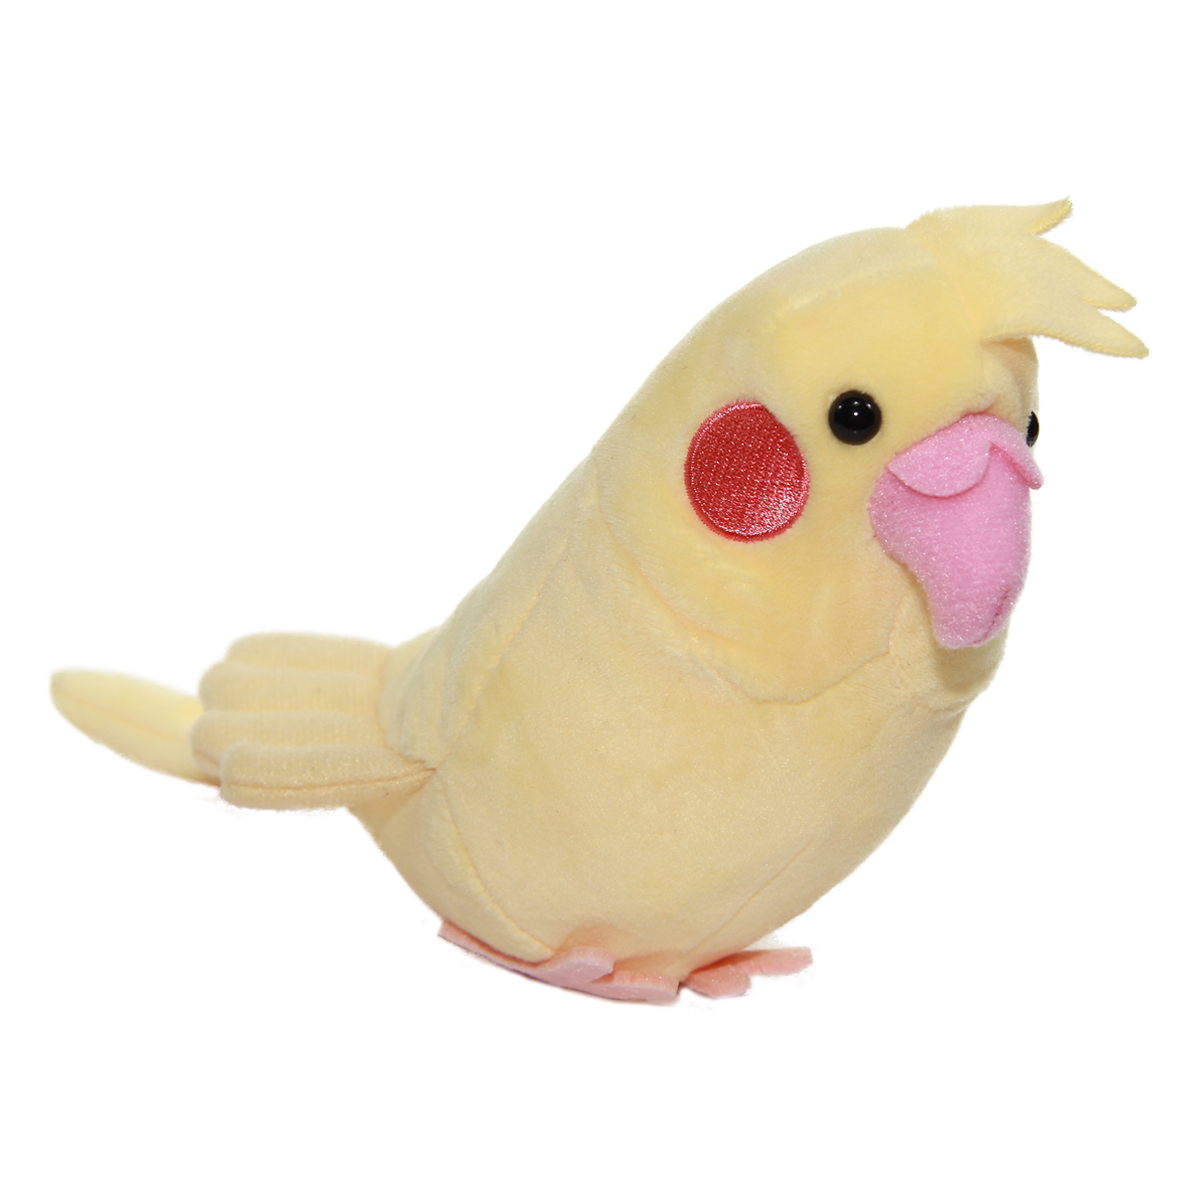 Cockatiel Plush Doll, Cute Birds Collection, Stuffed Animal Toy, Yellow, 6 Inches